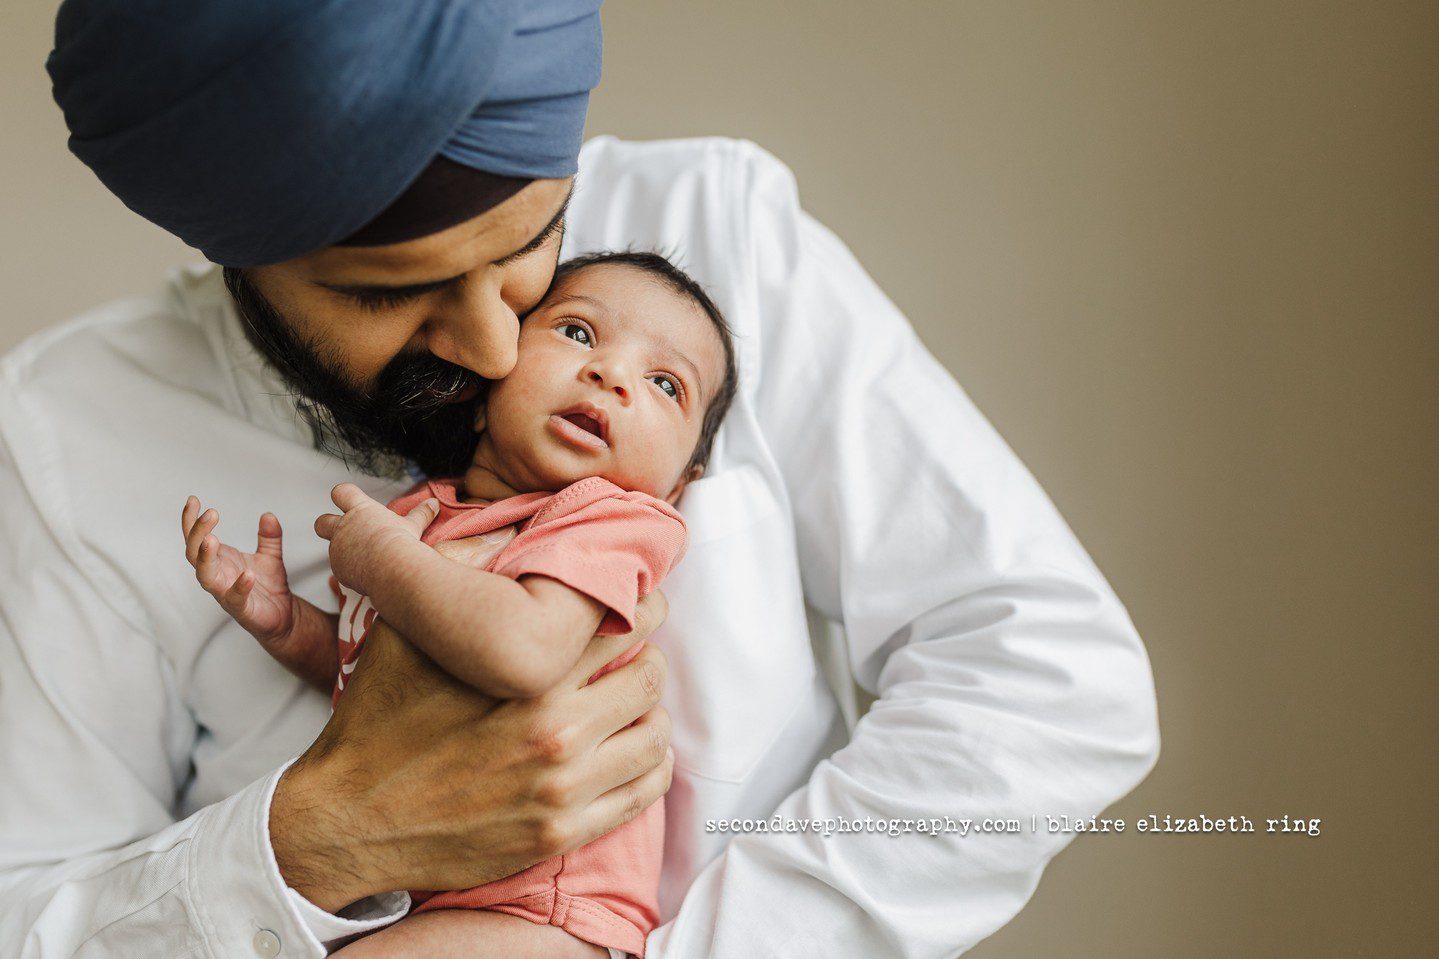 Award-winning Washington DC newborn photographer for young families who want timeless portraits that tell their baby's story.